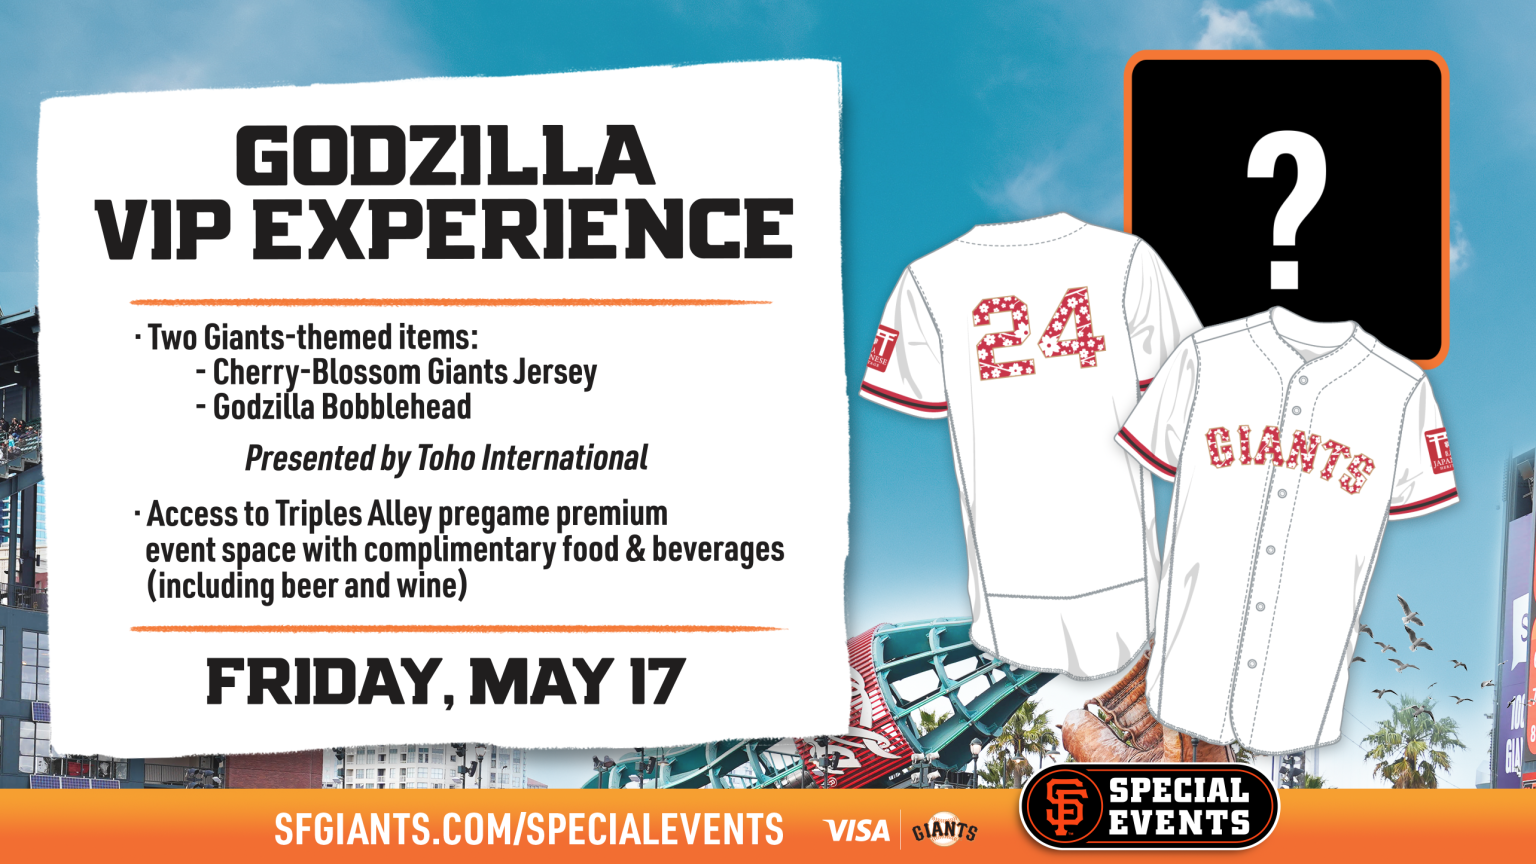 Godzilla is Teaming Up With The San Francisco Giants For The Ultimate VIP Night